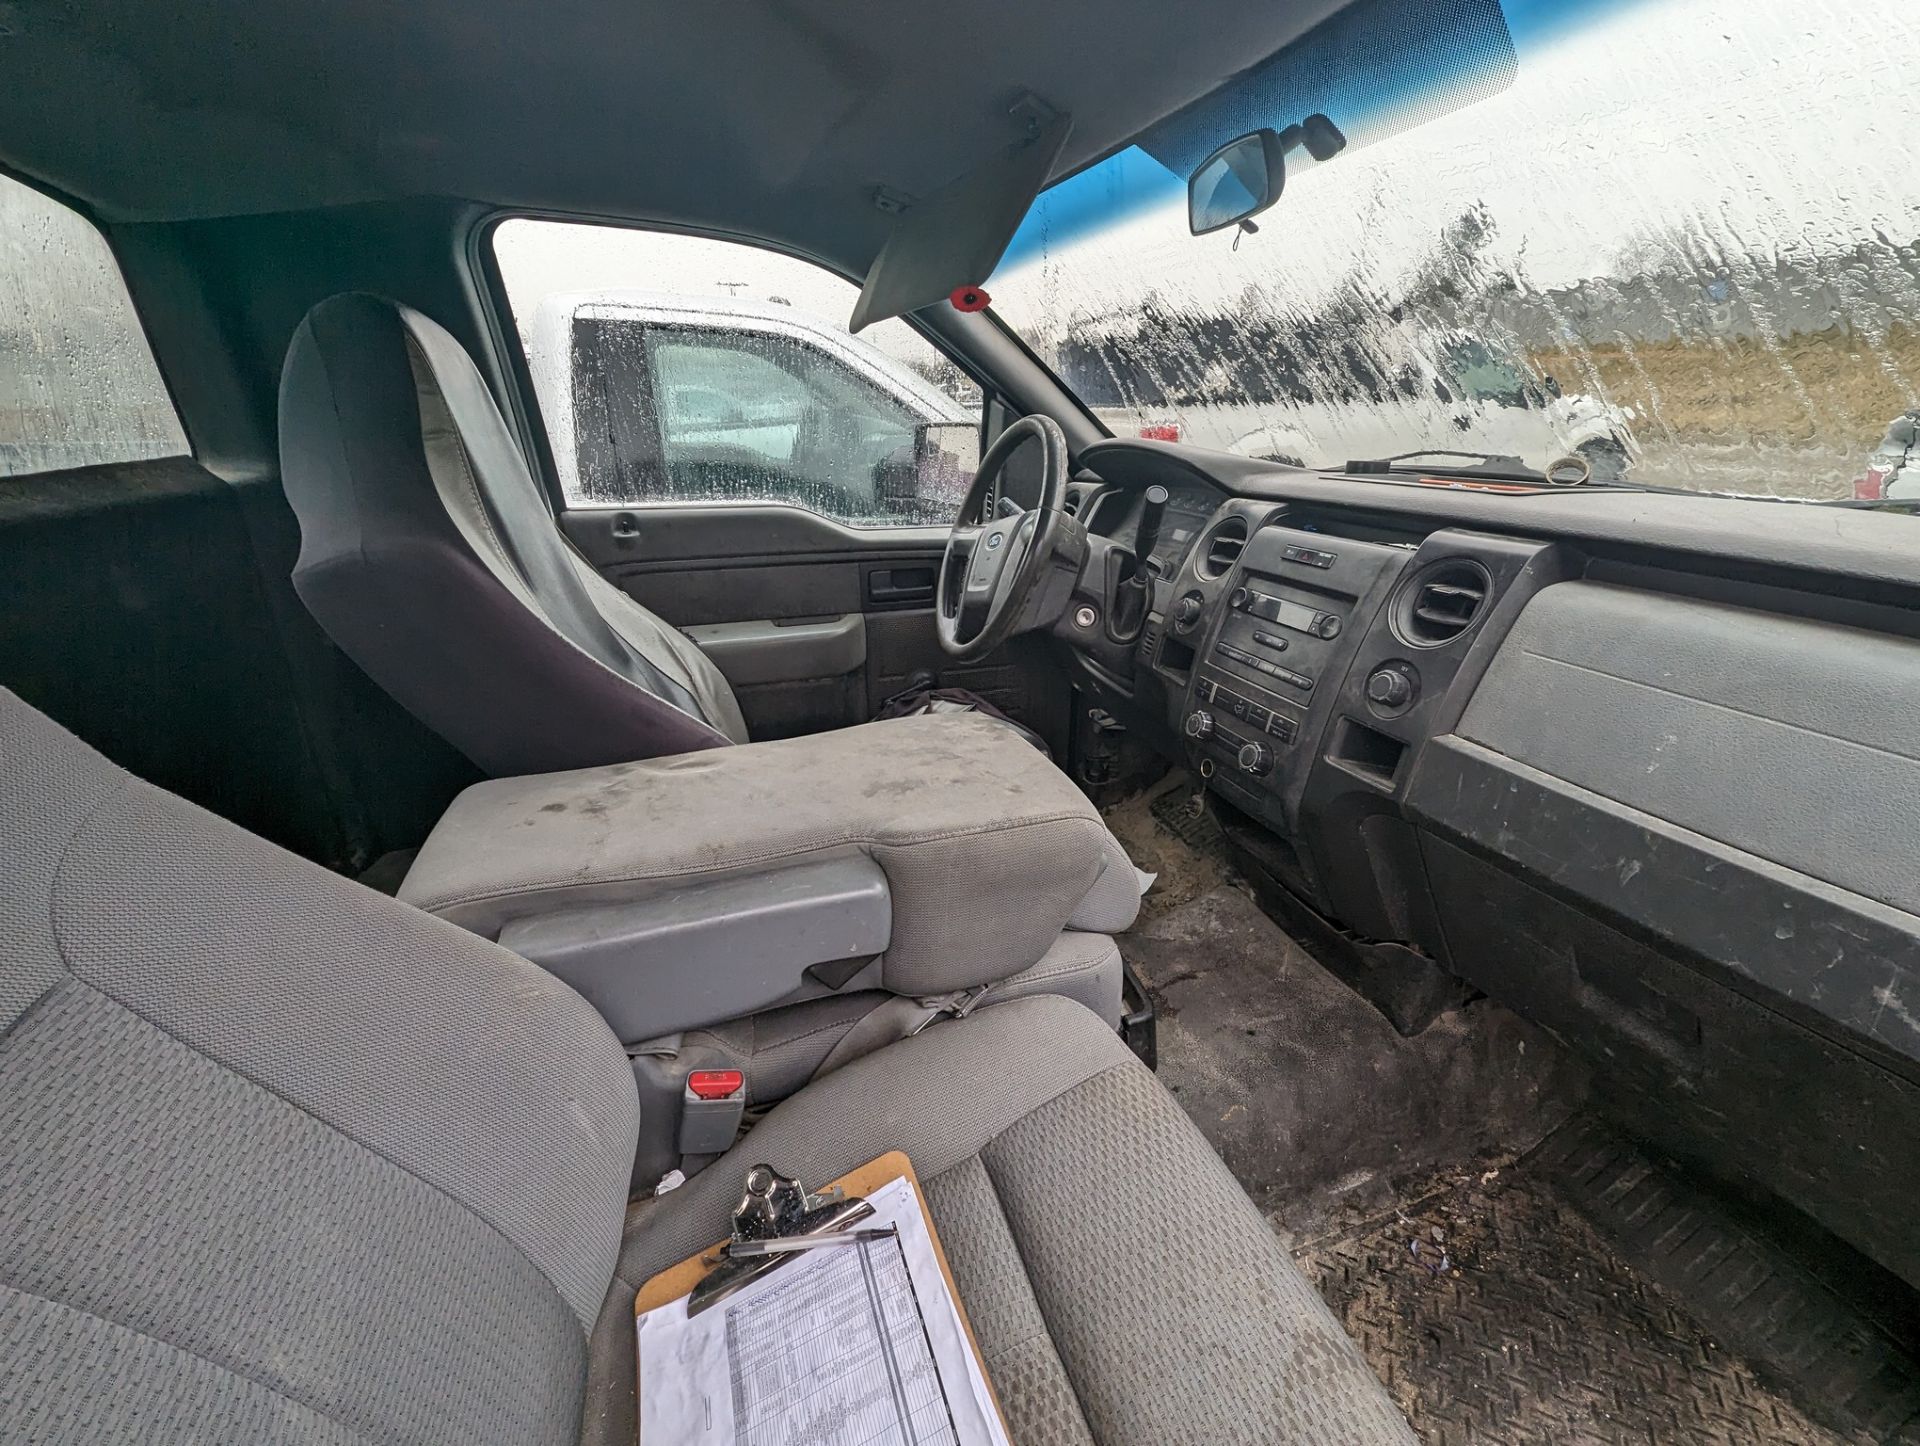 2014 FORD F150 XL PICKUP TRUCK, VIN# 1FTNF1CF7EKD87989, APPROX. 345,777KMS (NO BLACK TOOL BOXES) - Image 6 of 9